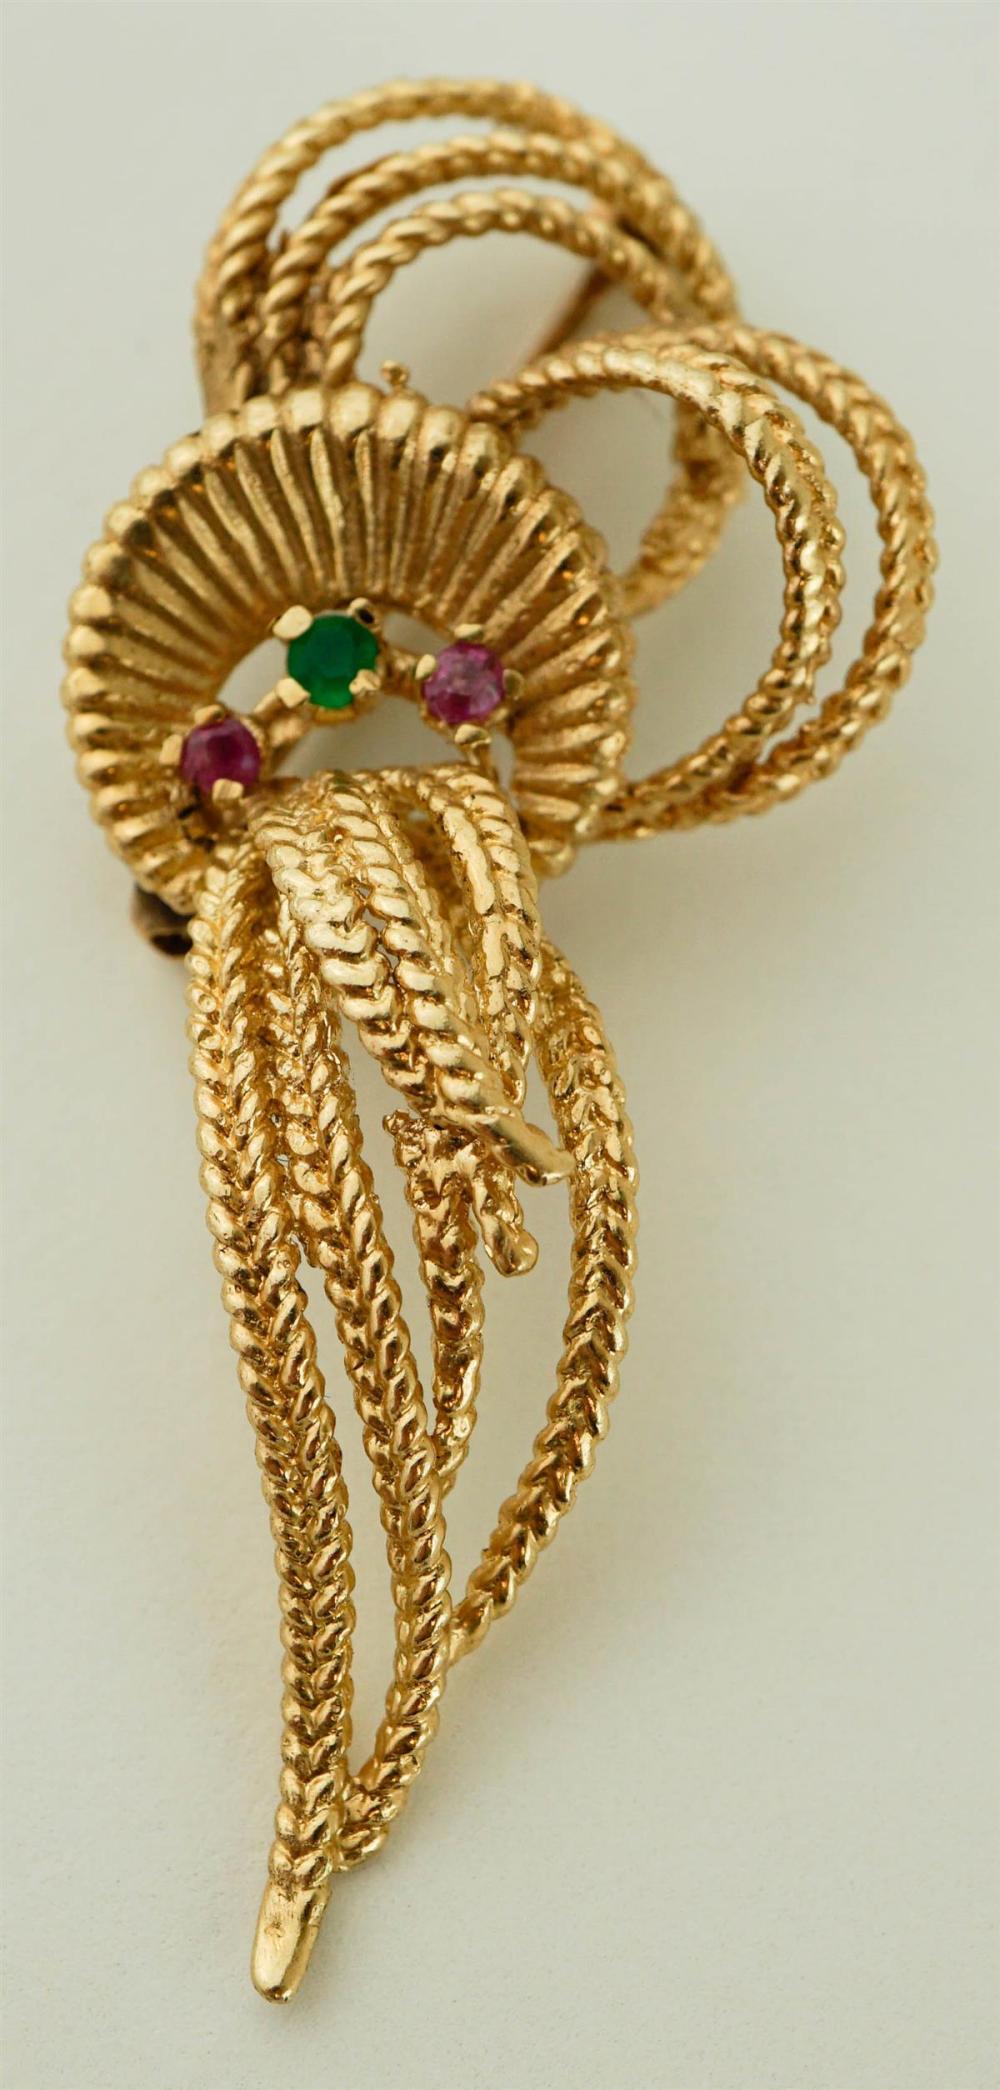 14K YELLOW GOLD AND GEMSTONE PIN14K 33a710